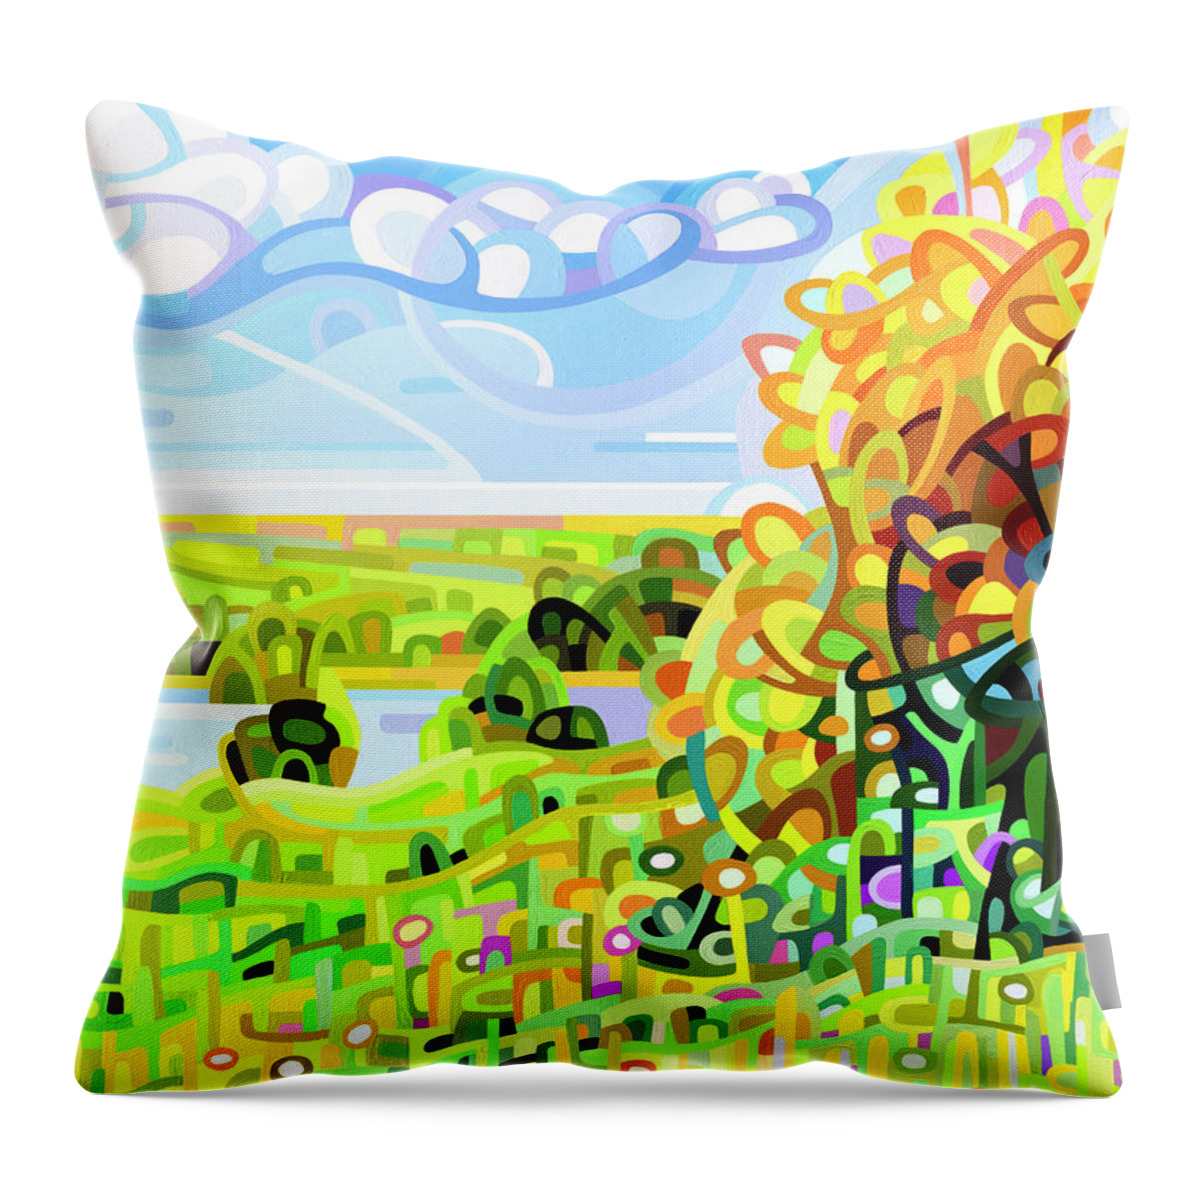 Original Throw Pillow featuring the painting Almost Autumn by Mandy Budan